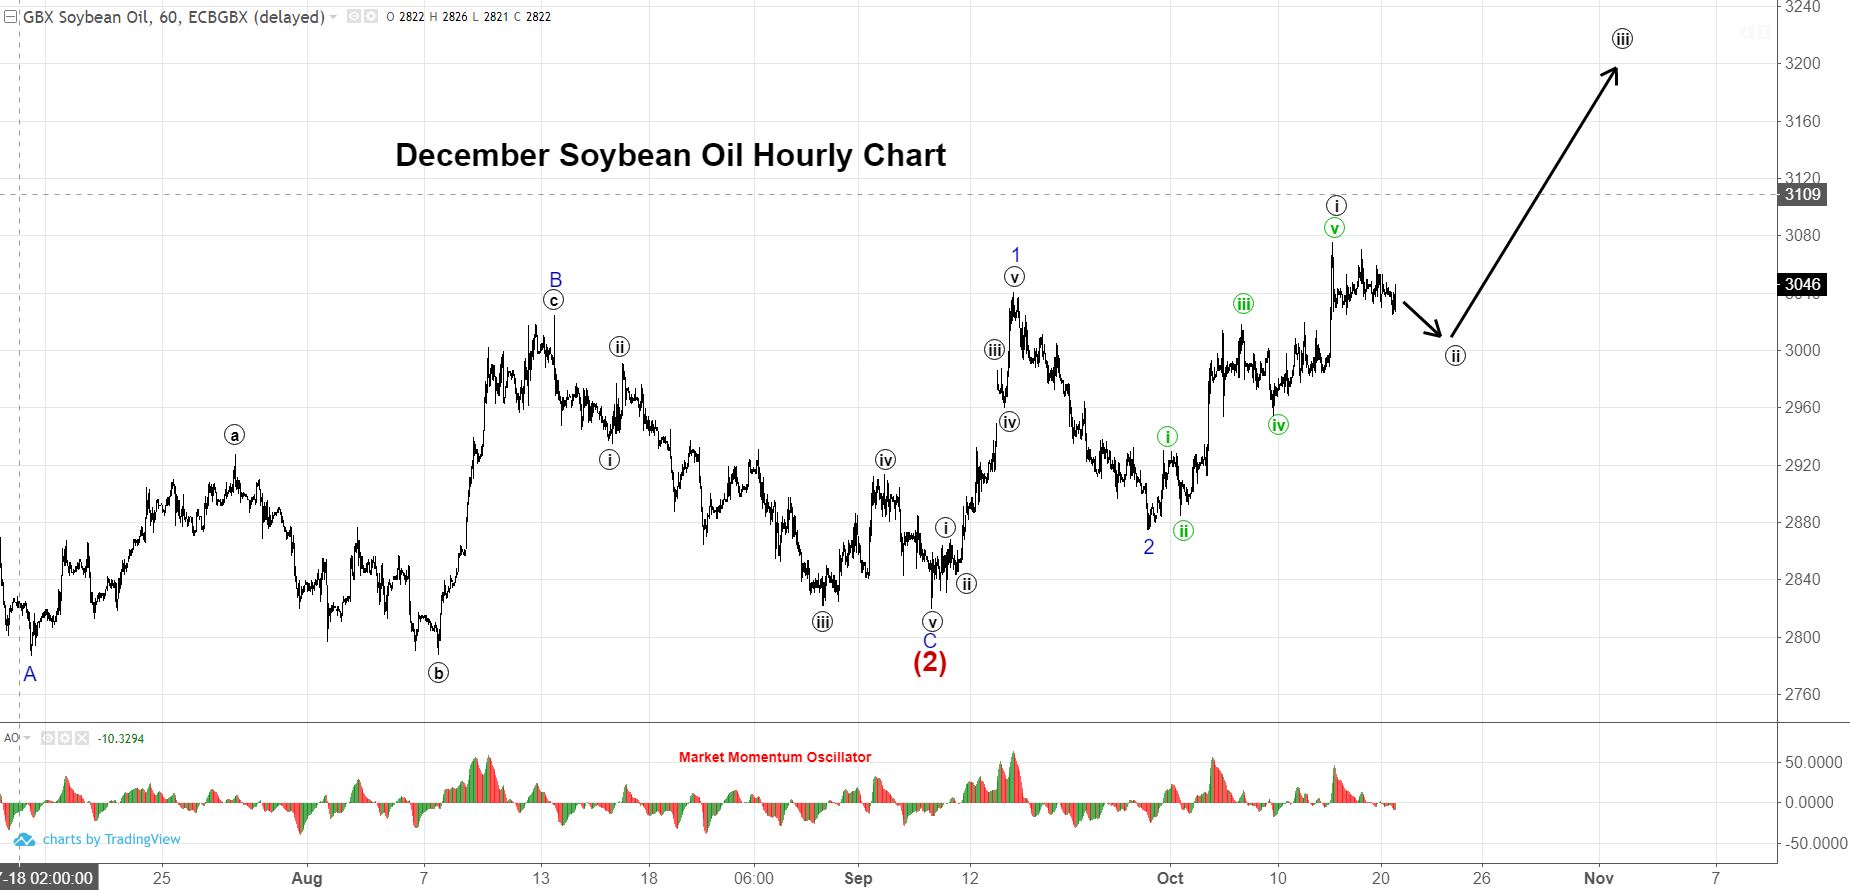 December Soybean Oil Futures Hourly Chart